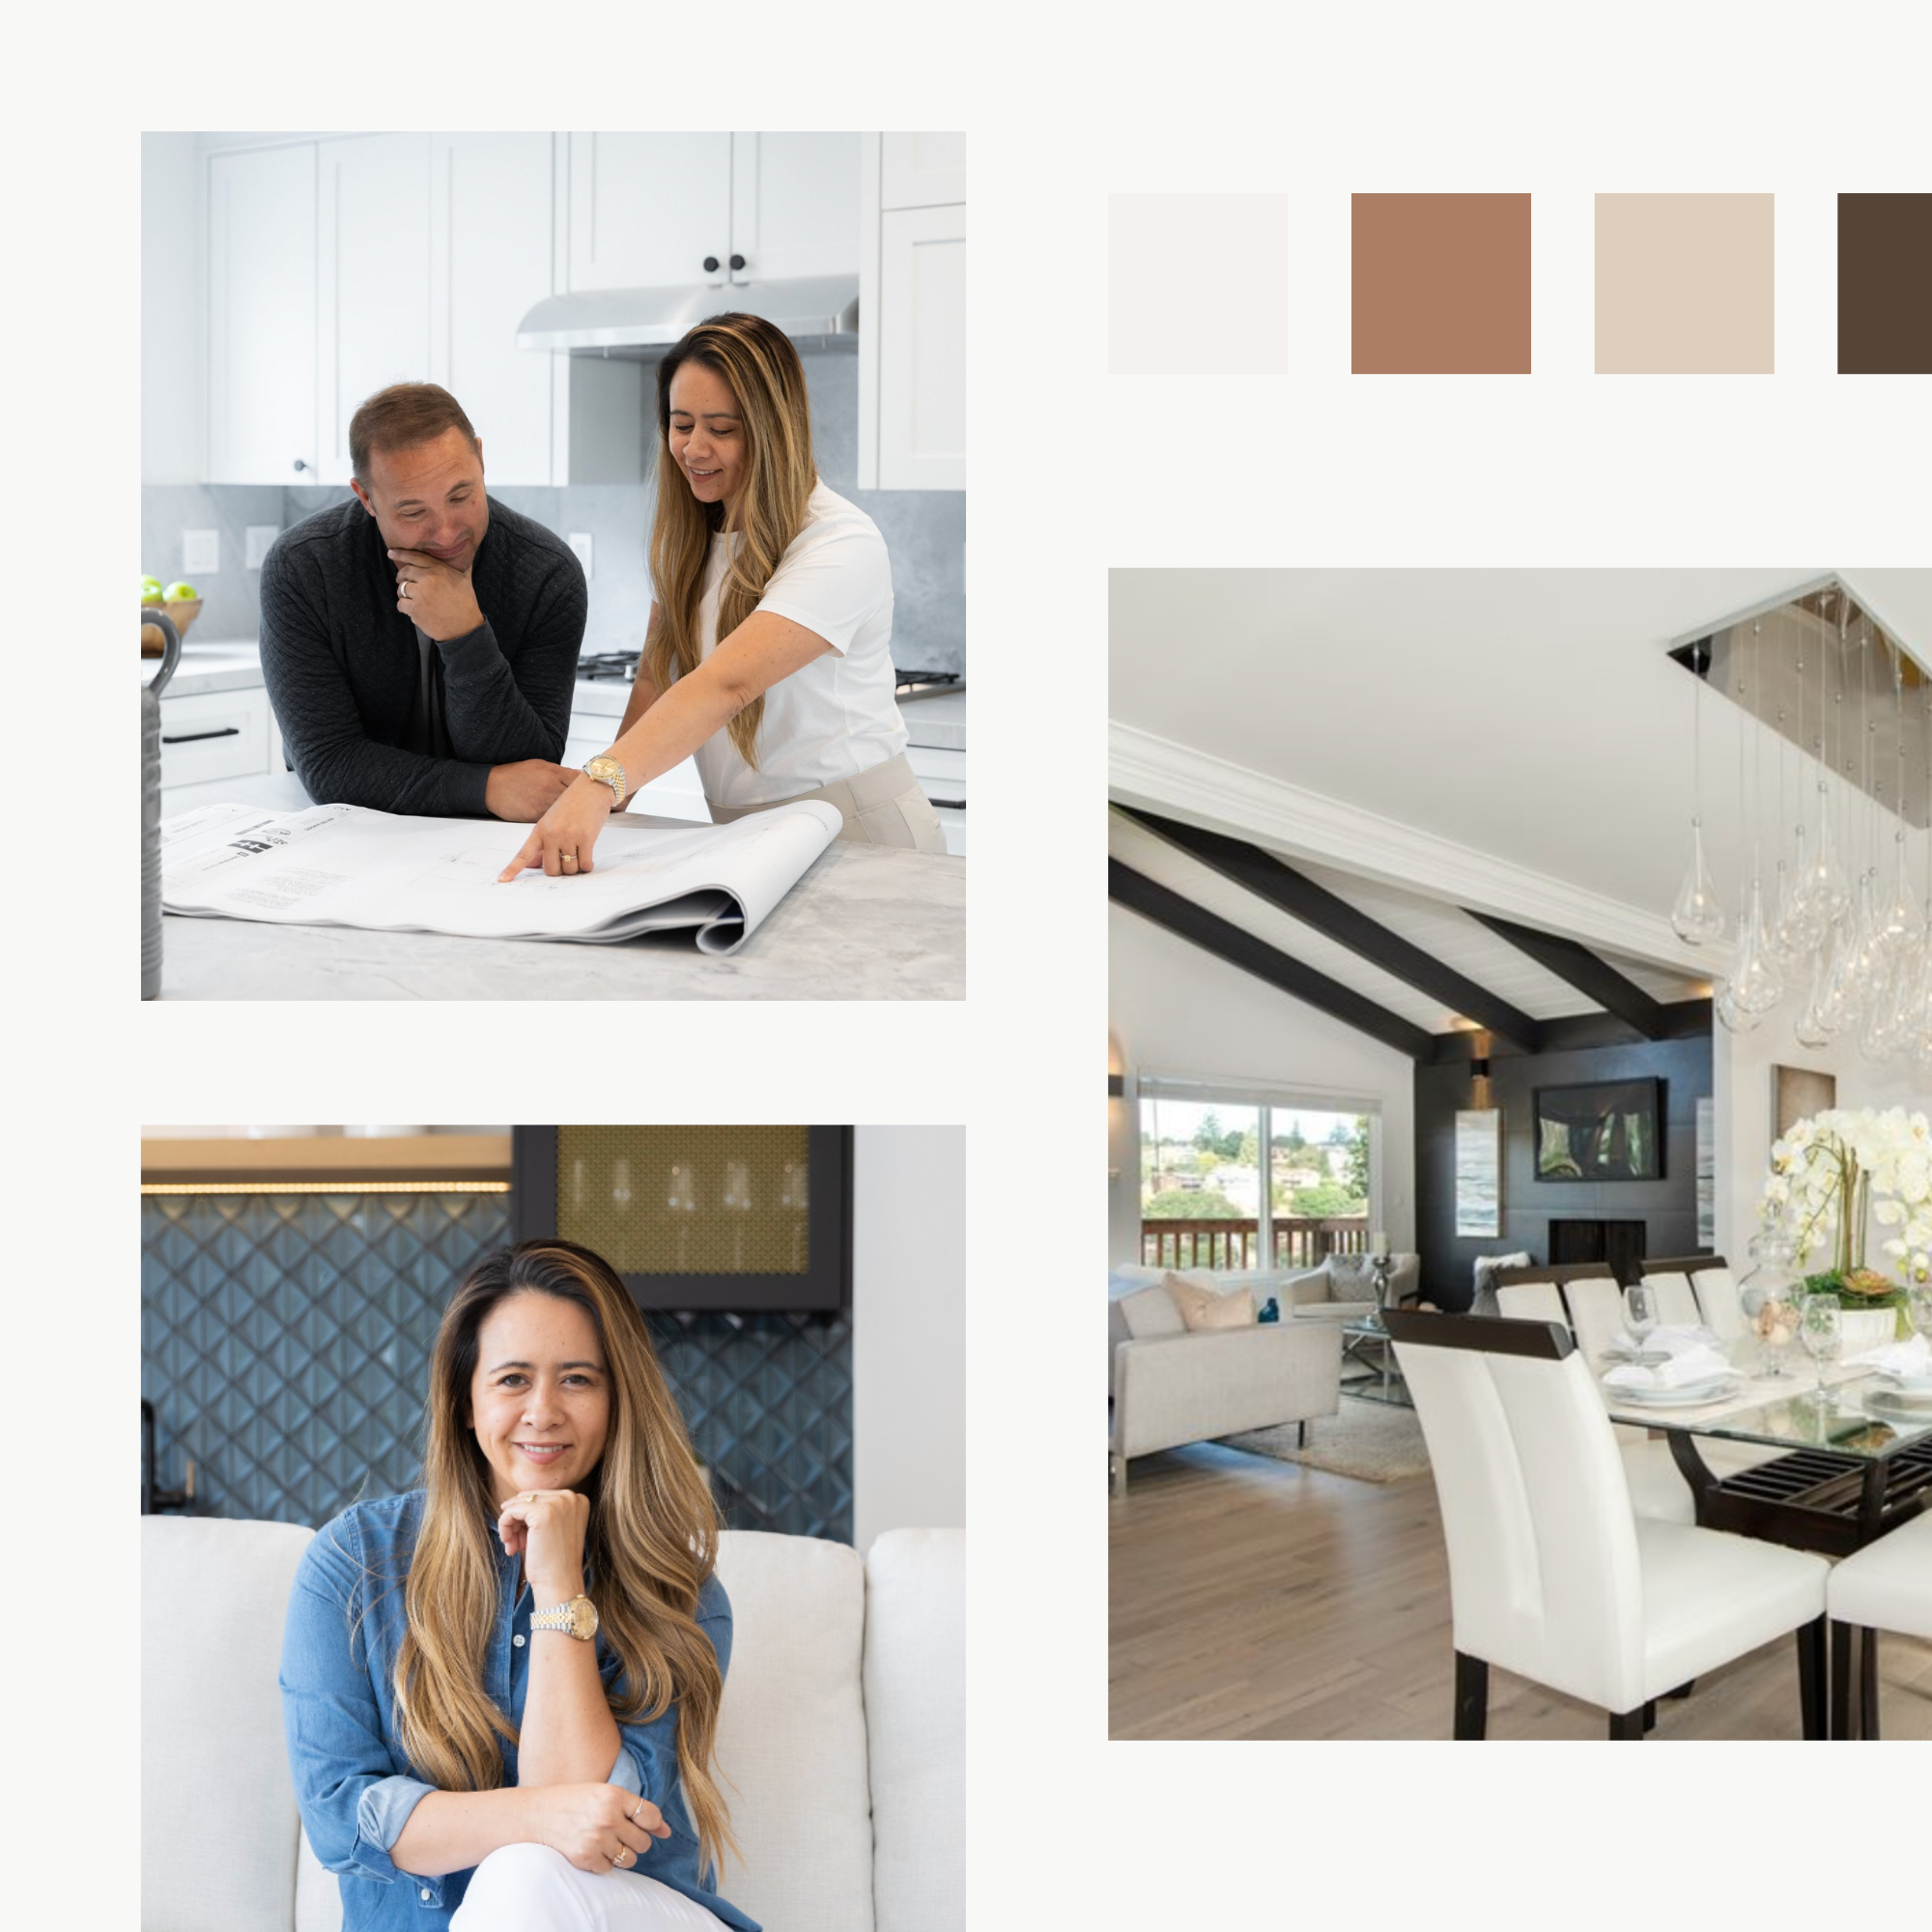 Custom-Squarespace-website-Design-for-Luxury-real-estate-agent-2.png